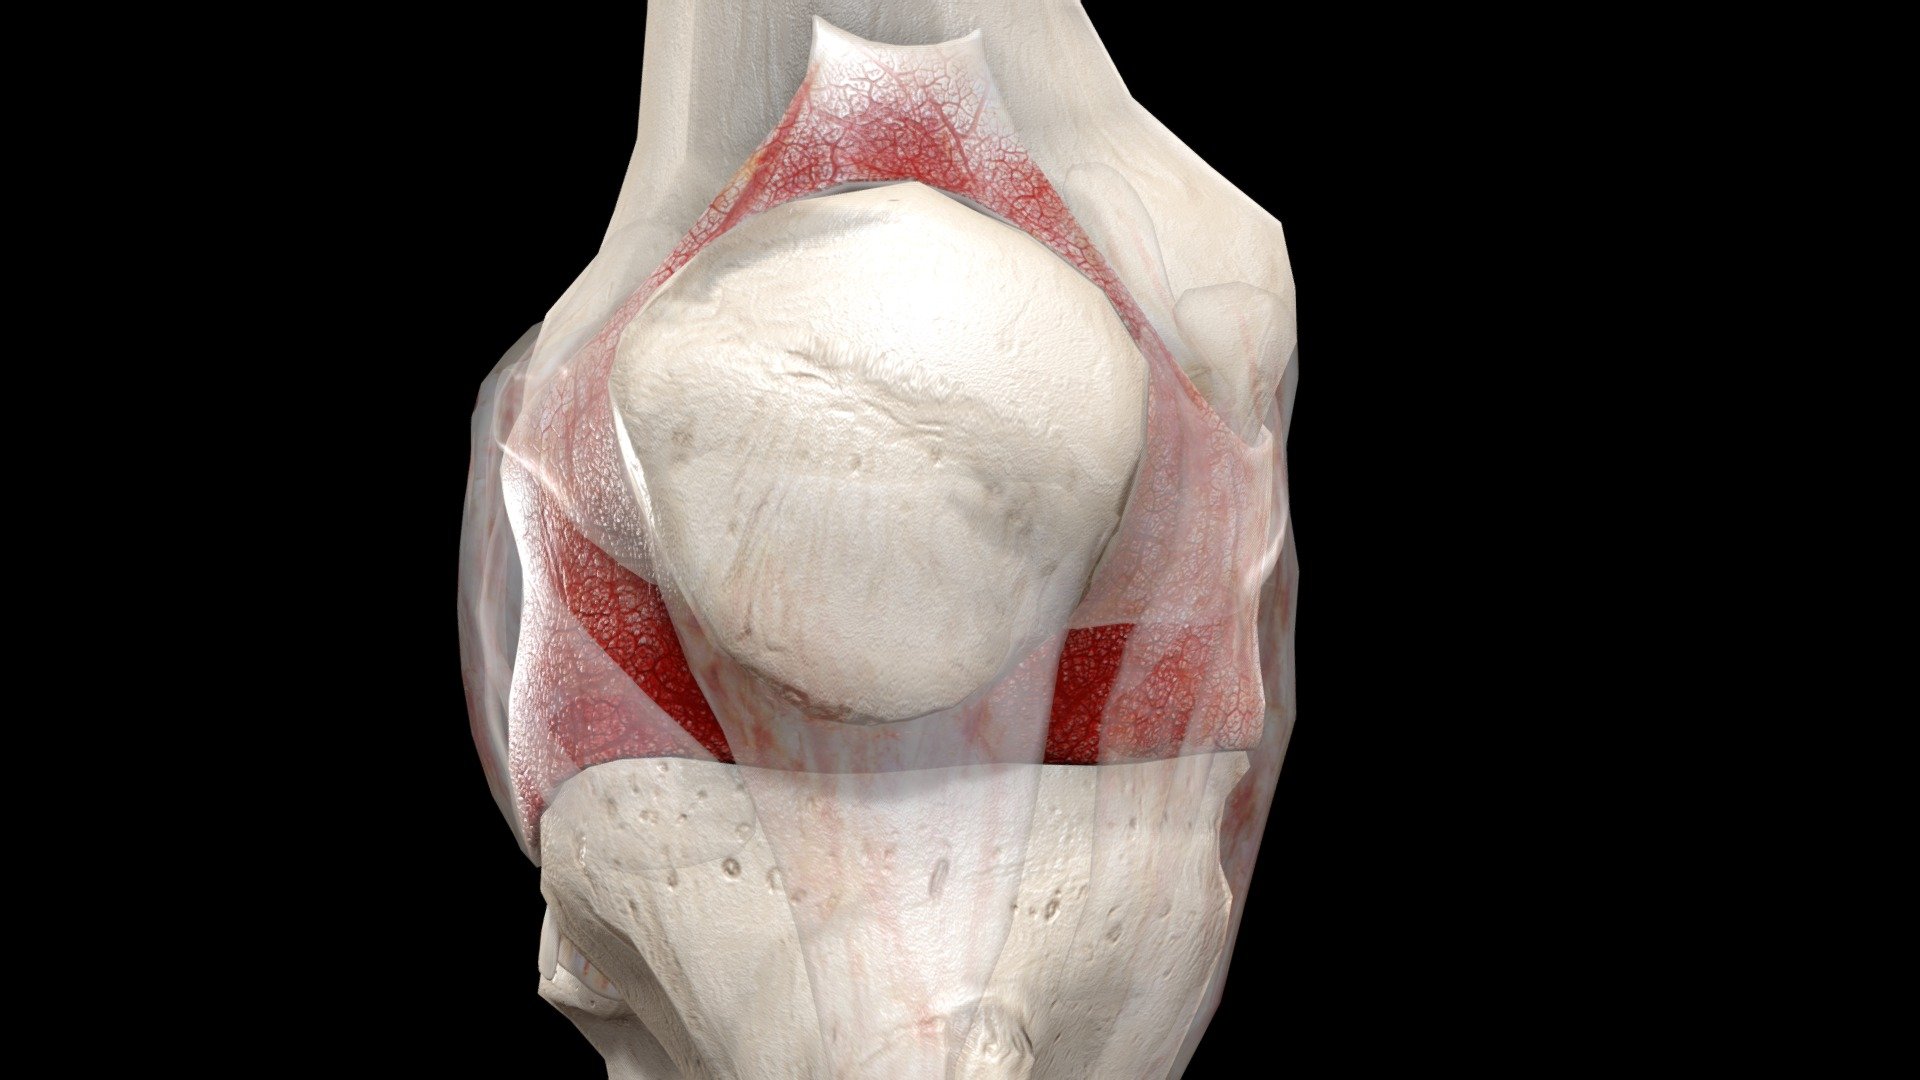 Also known as Hoffa's syndrome or fat pad syndrome, impingement is an injury in which the soft tissue that lies beneath the kneecap becomes pinched at the end of the thigh bone. The condition creates extreme pain below the kneecap and along the sides of the patellar tendon.

©Indiana University Board of Trustees. This project was funded by a grant from the Indiana University School of Medicine Program to Launch those Underrepresented in Medicine toward Success (PLUS) and the Medical Student Education Division of the Indiana University School of Medicine, Department of Family Medicine. 3D imaging created by Luke Parker and Emma Parker 3d model